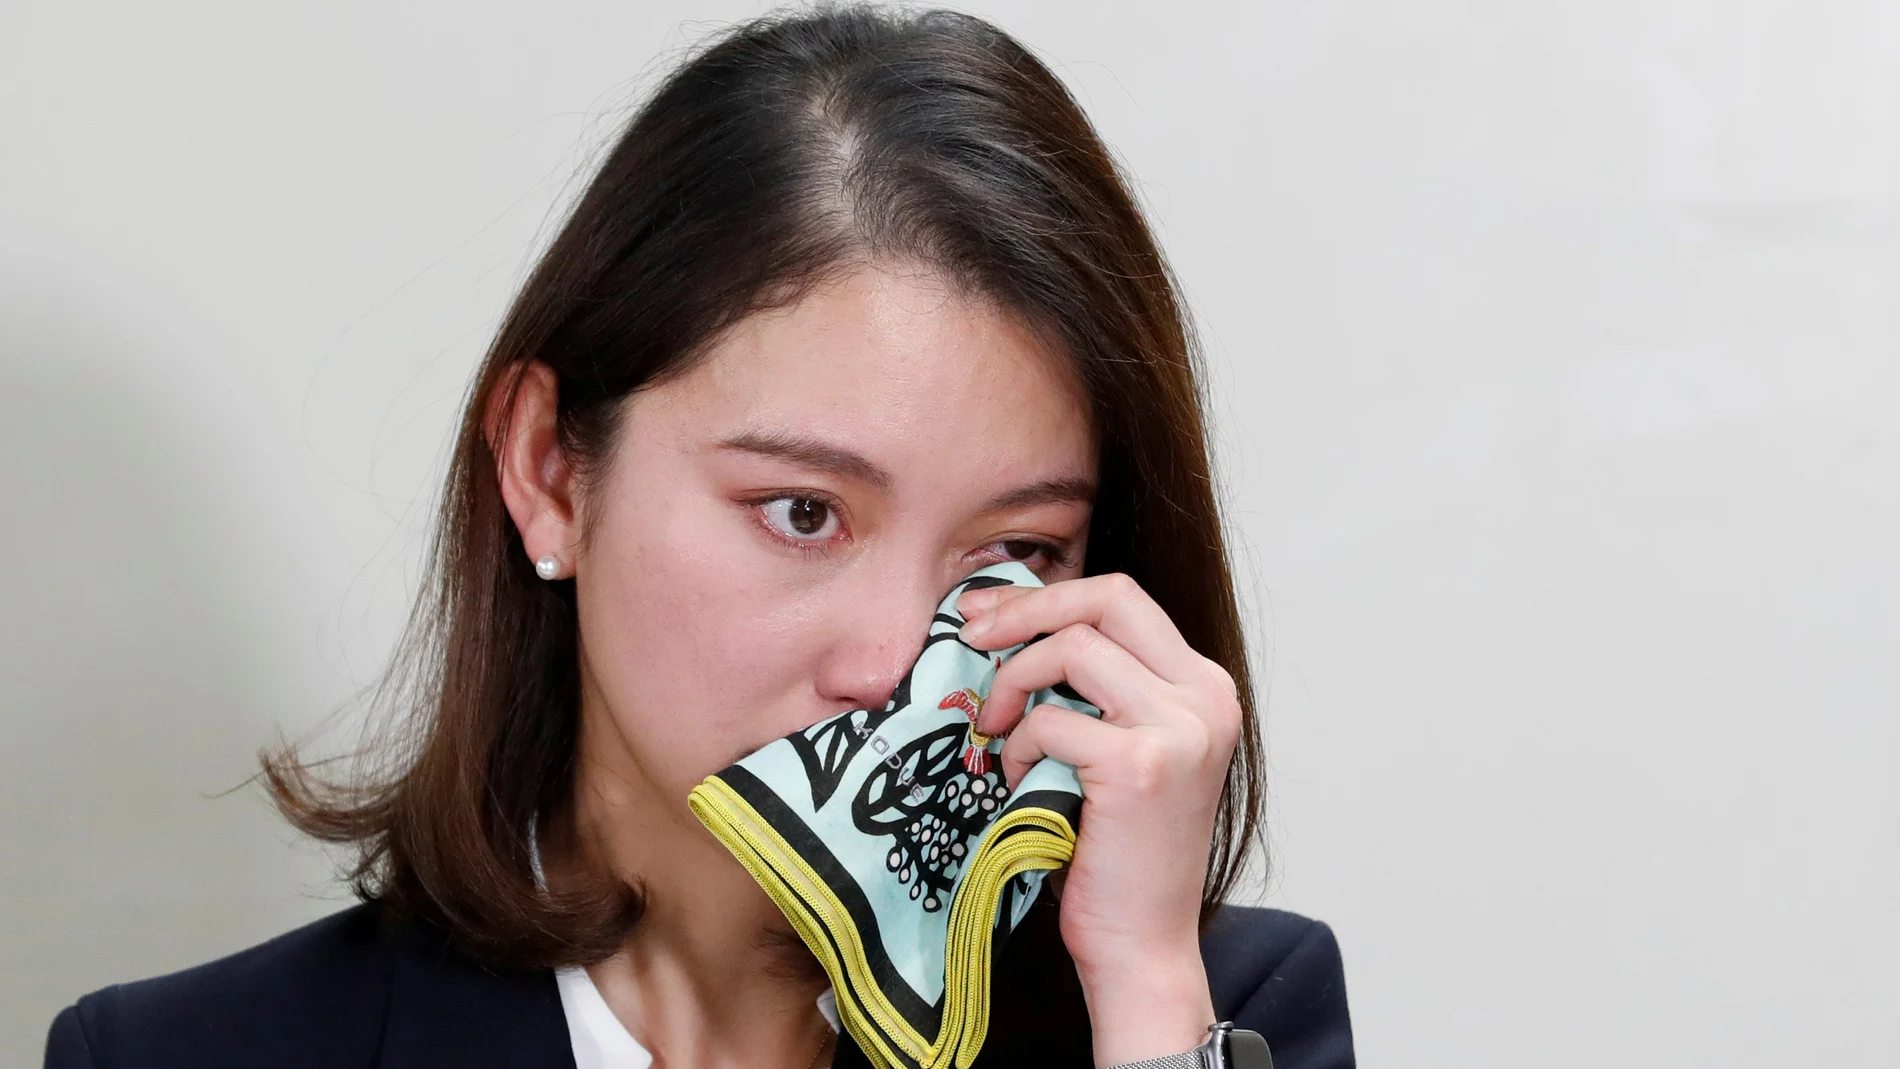 Japanese freelance journalist Shiori Ito sweeps the tears during her news conference after a court verdict in Tokyo